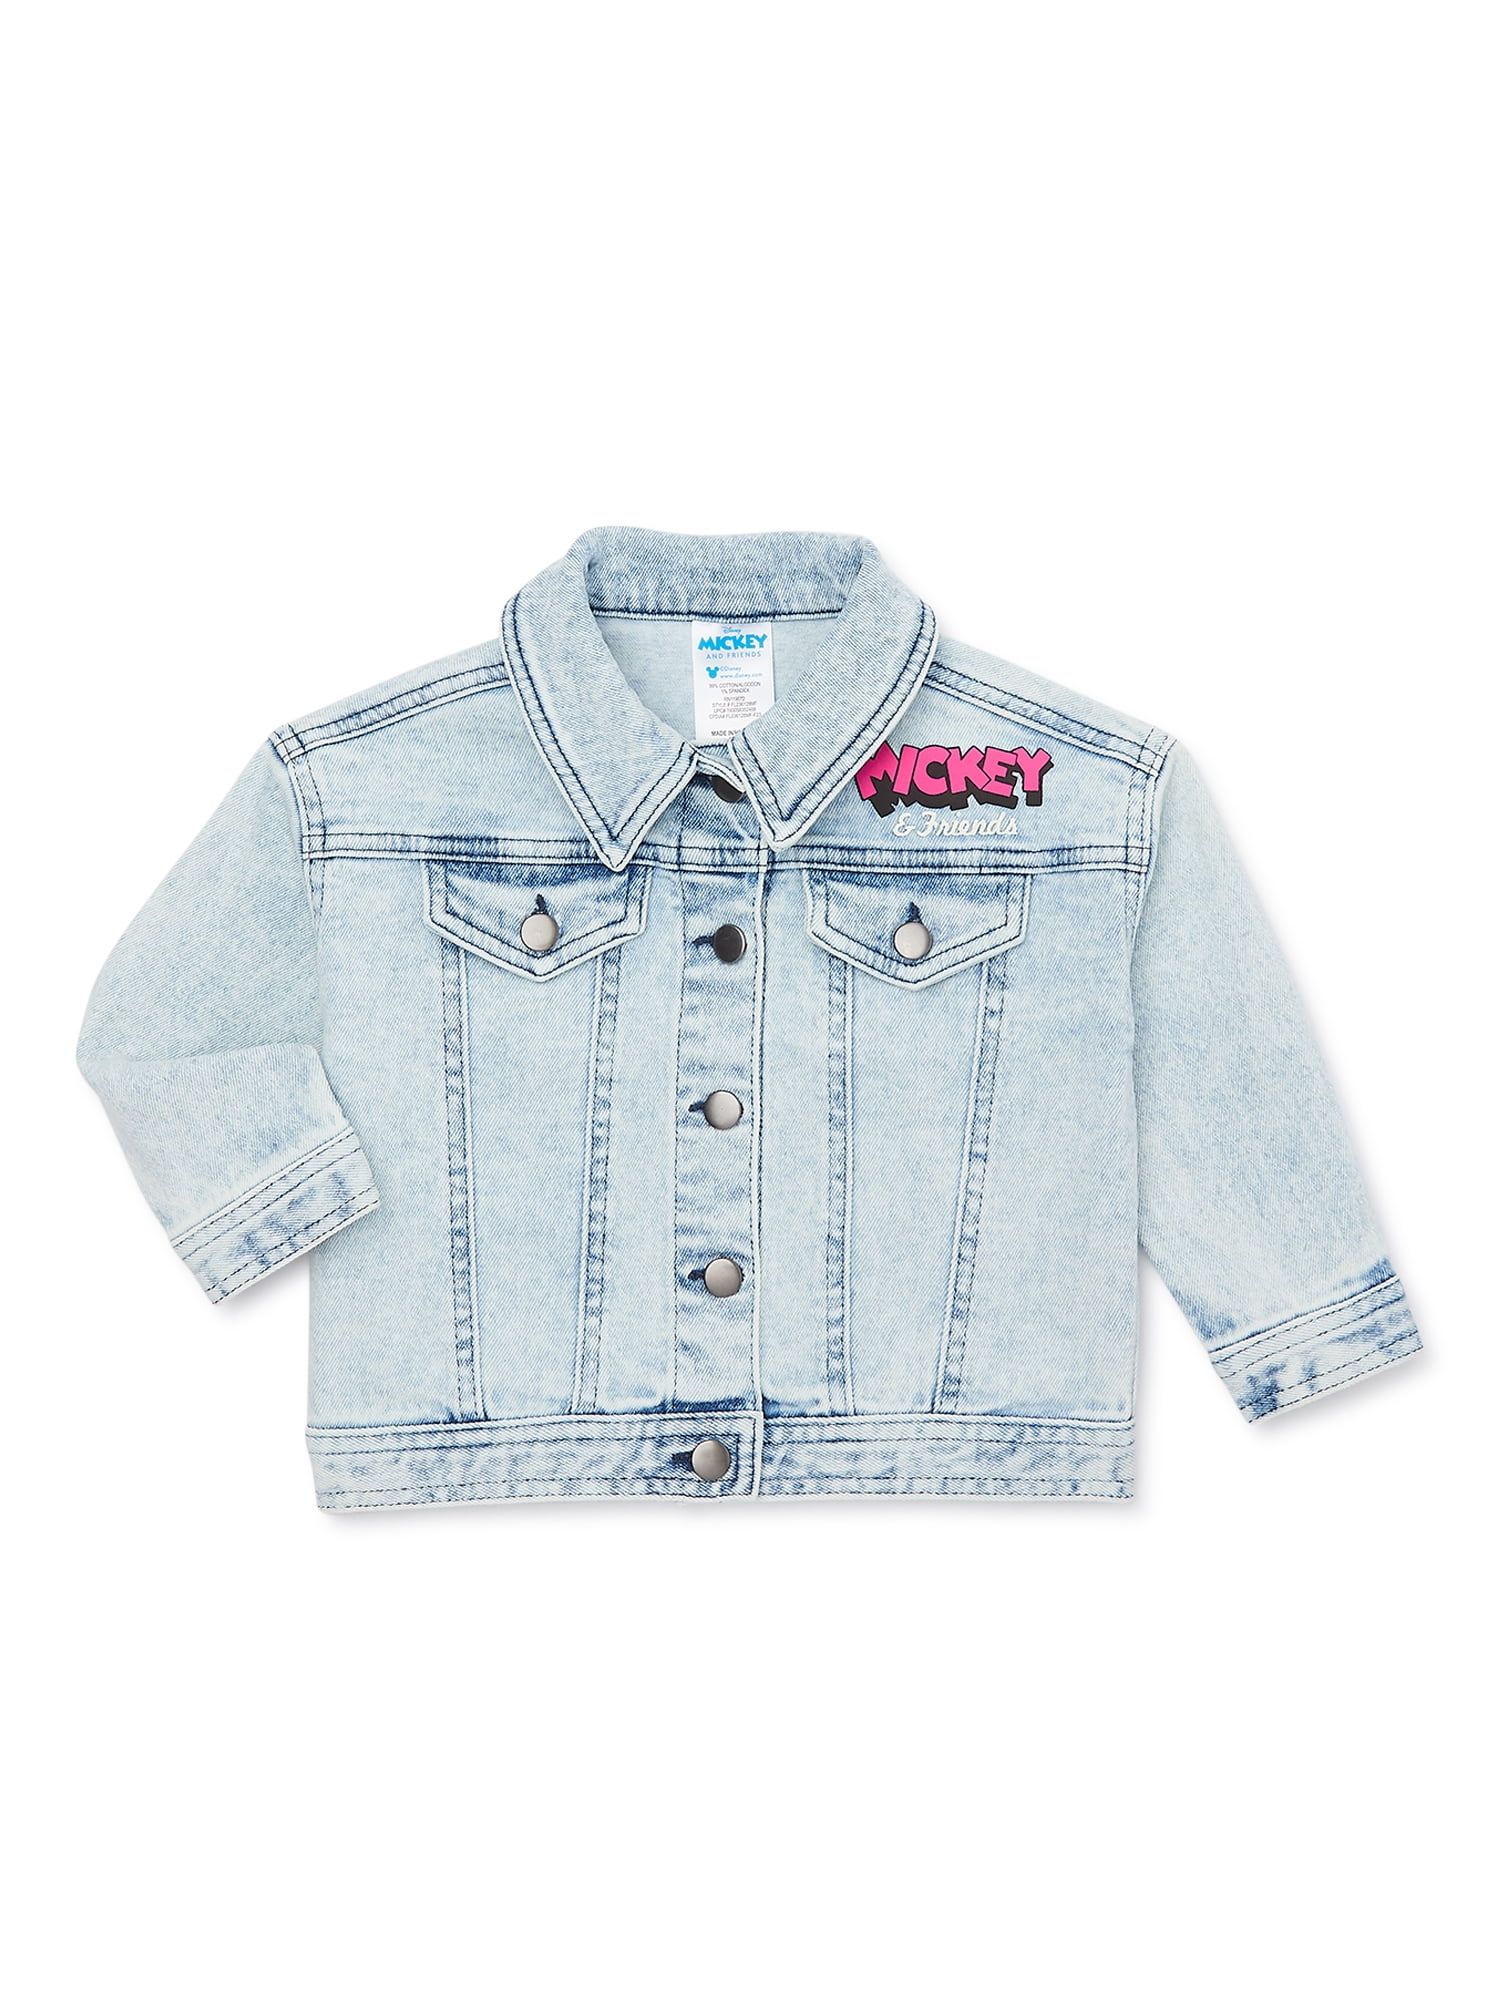 Minnie Mouse Baby and Toddler Girls' Graphic Denim Jacket, Sizes 12M-5T | Walmart (US)